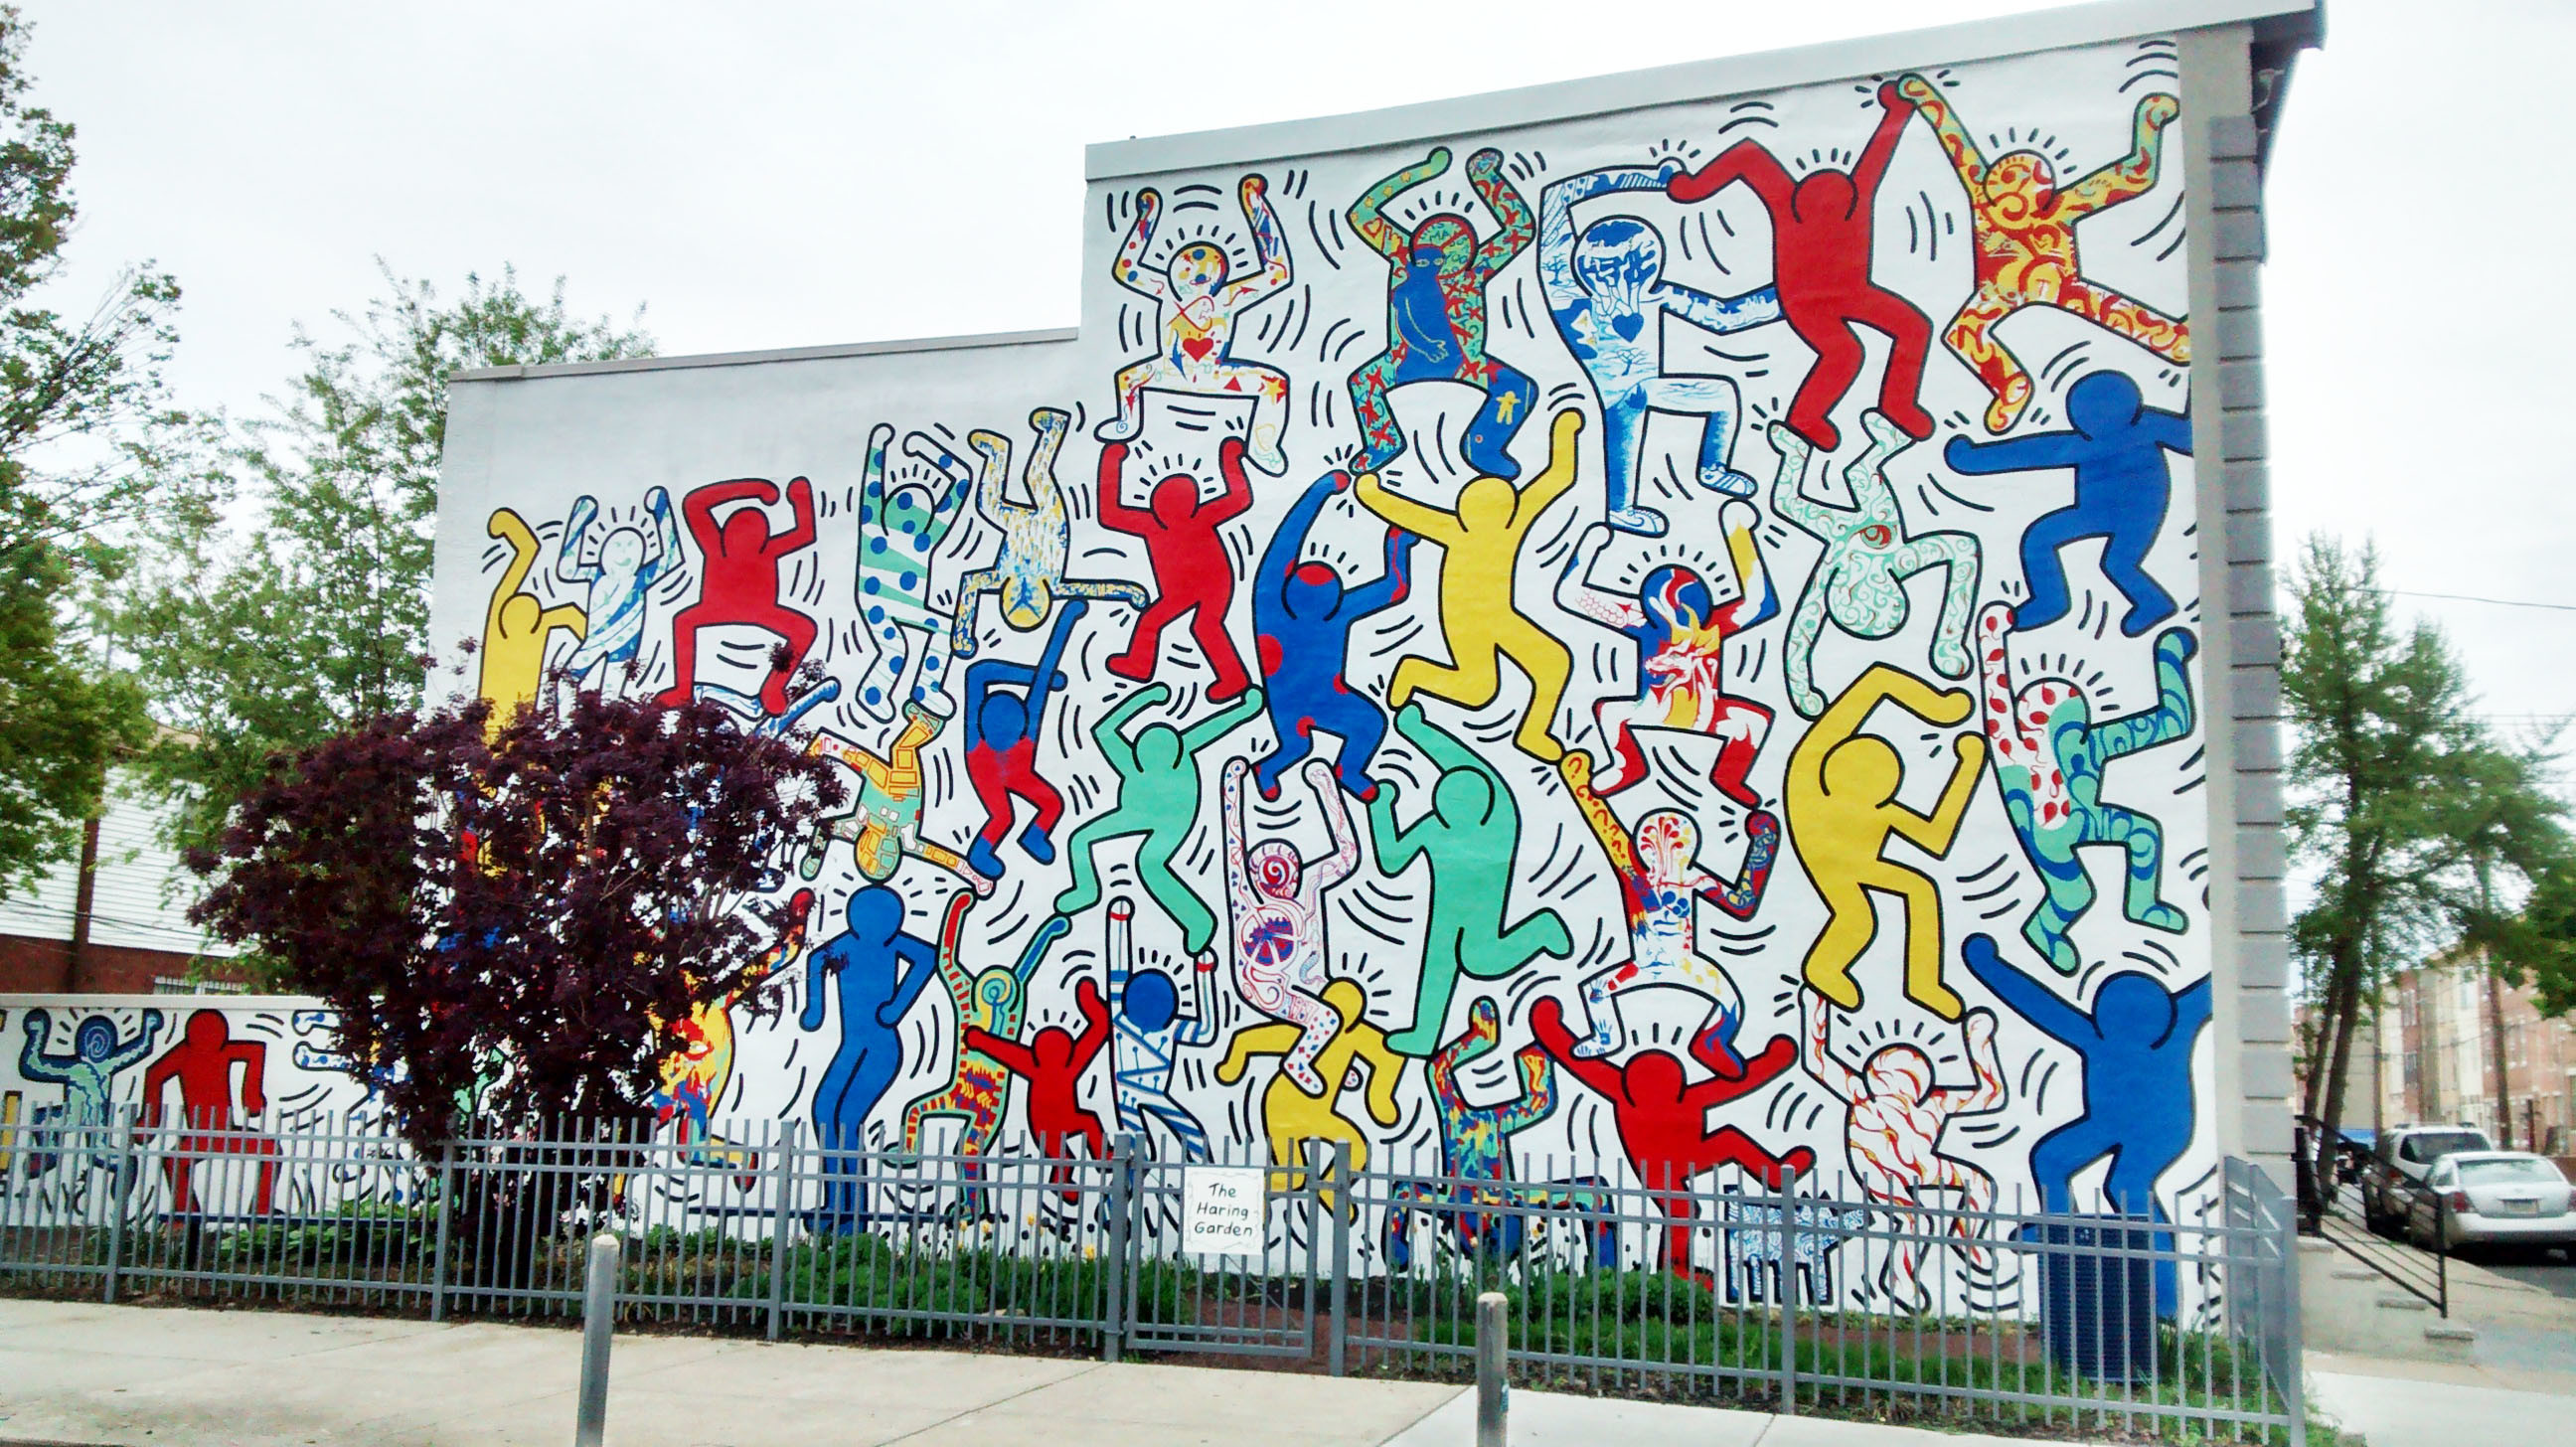 2592x1456 File:Keith Haring We Are The Youth.jpg - Wikimedia Commons